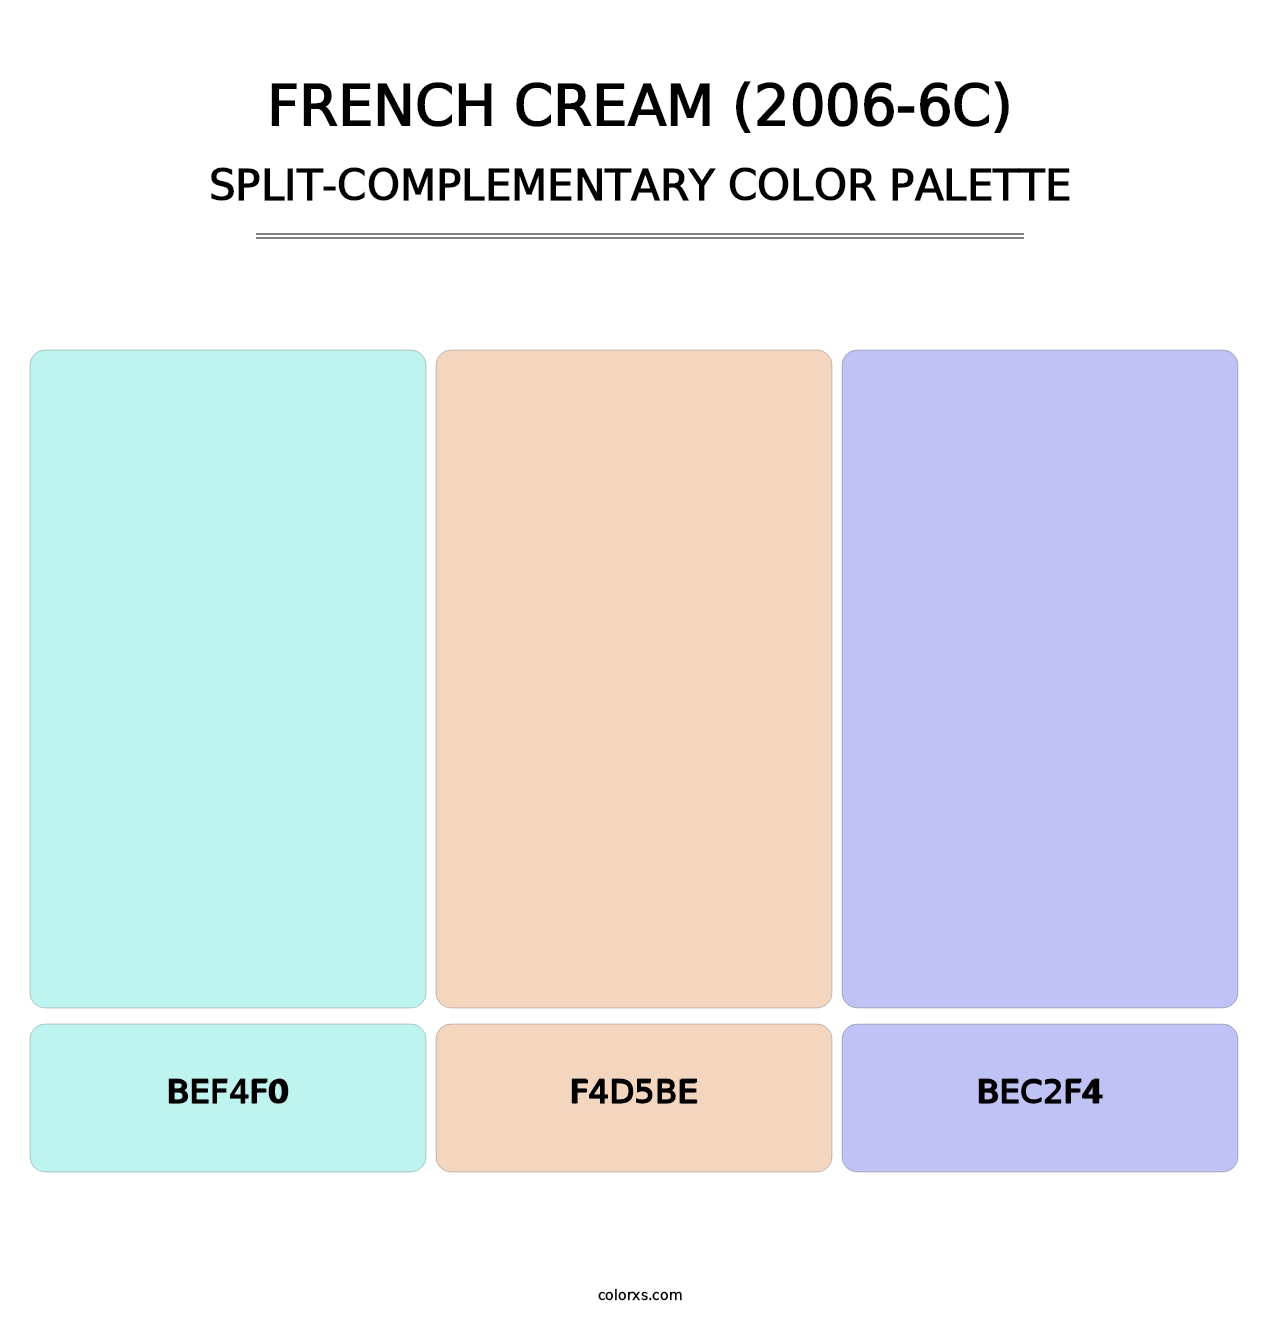 French Cream (2006-6C) - Split-Complementary Color Palette